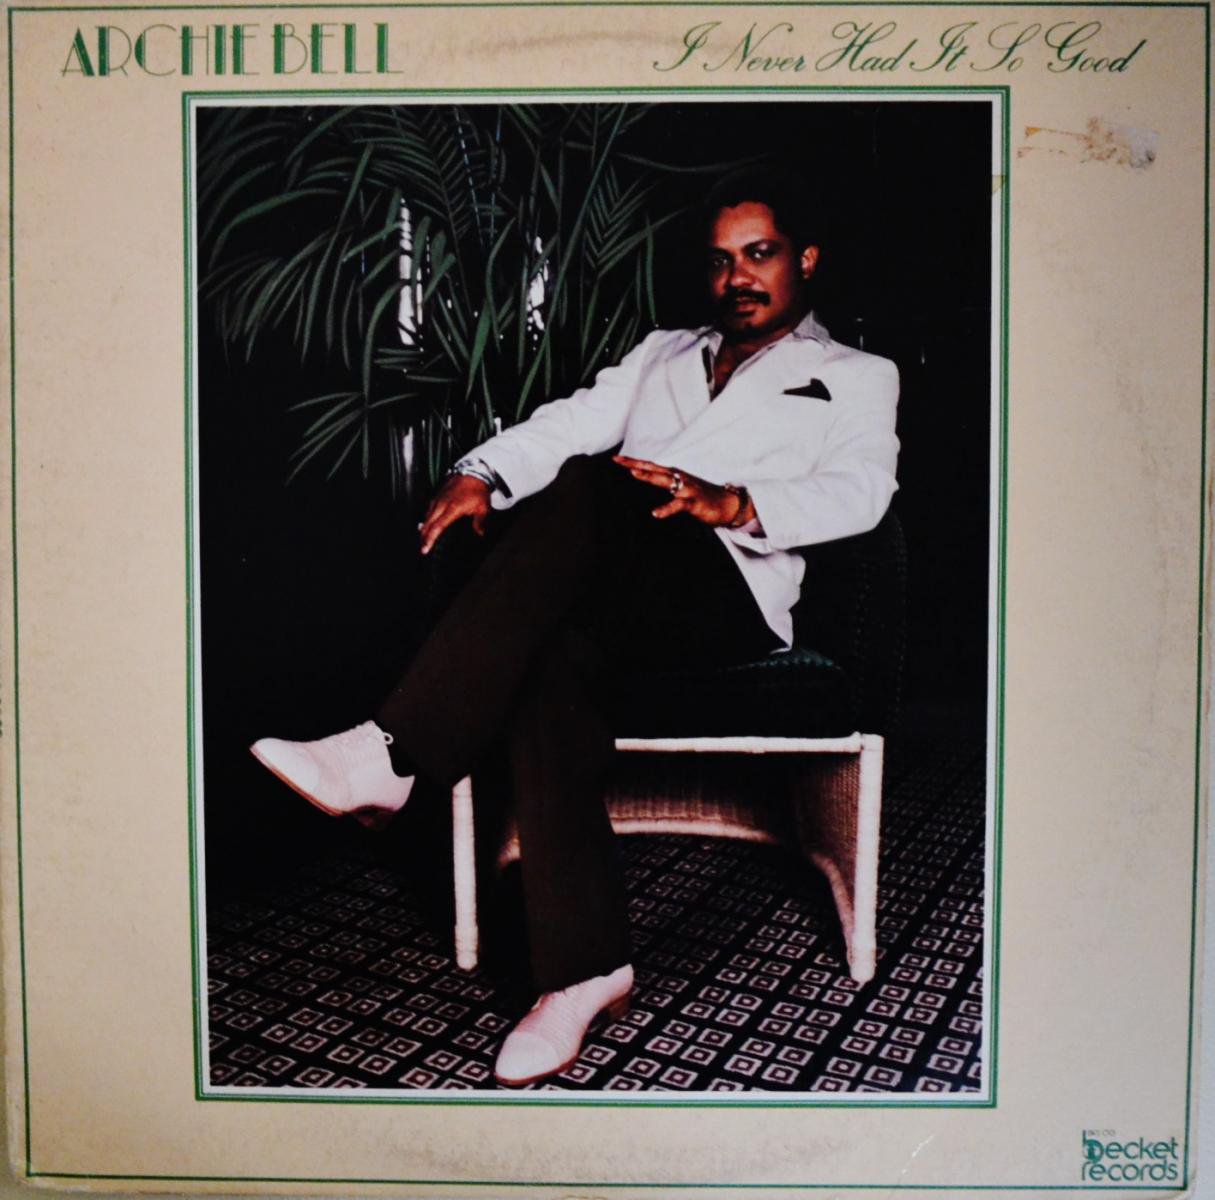 ARCHIE BELL / I NEVER HAD IT SO GOOD (LP)